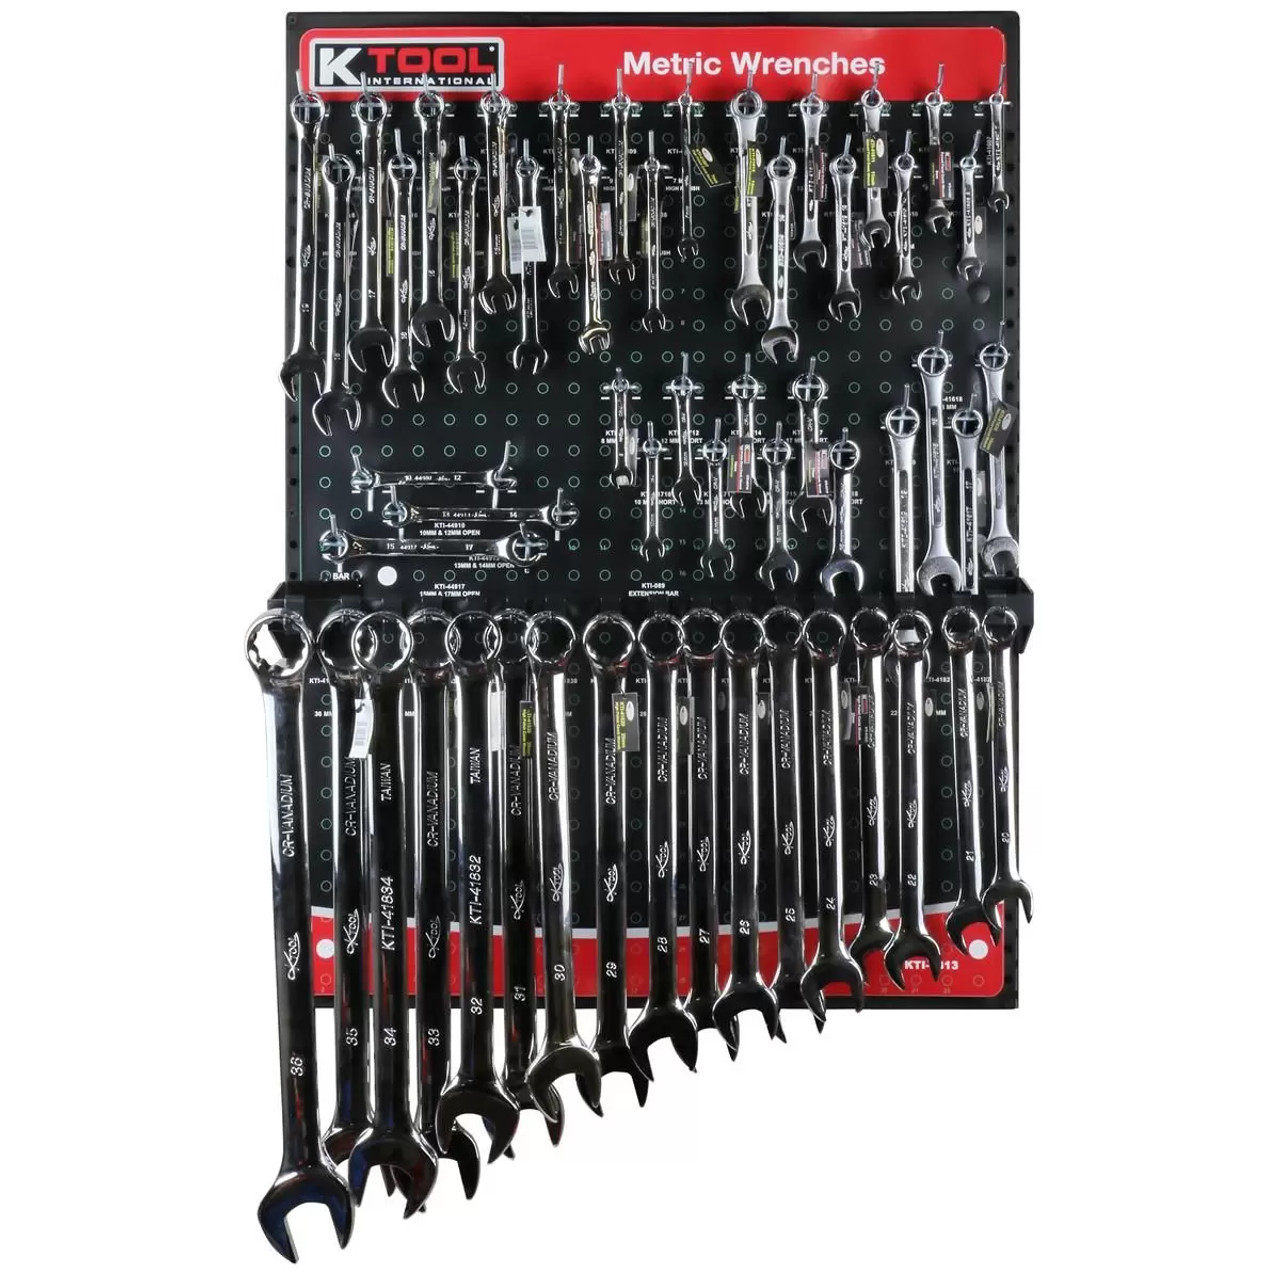 METric Wrench Display